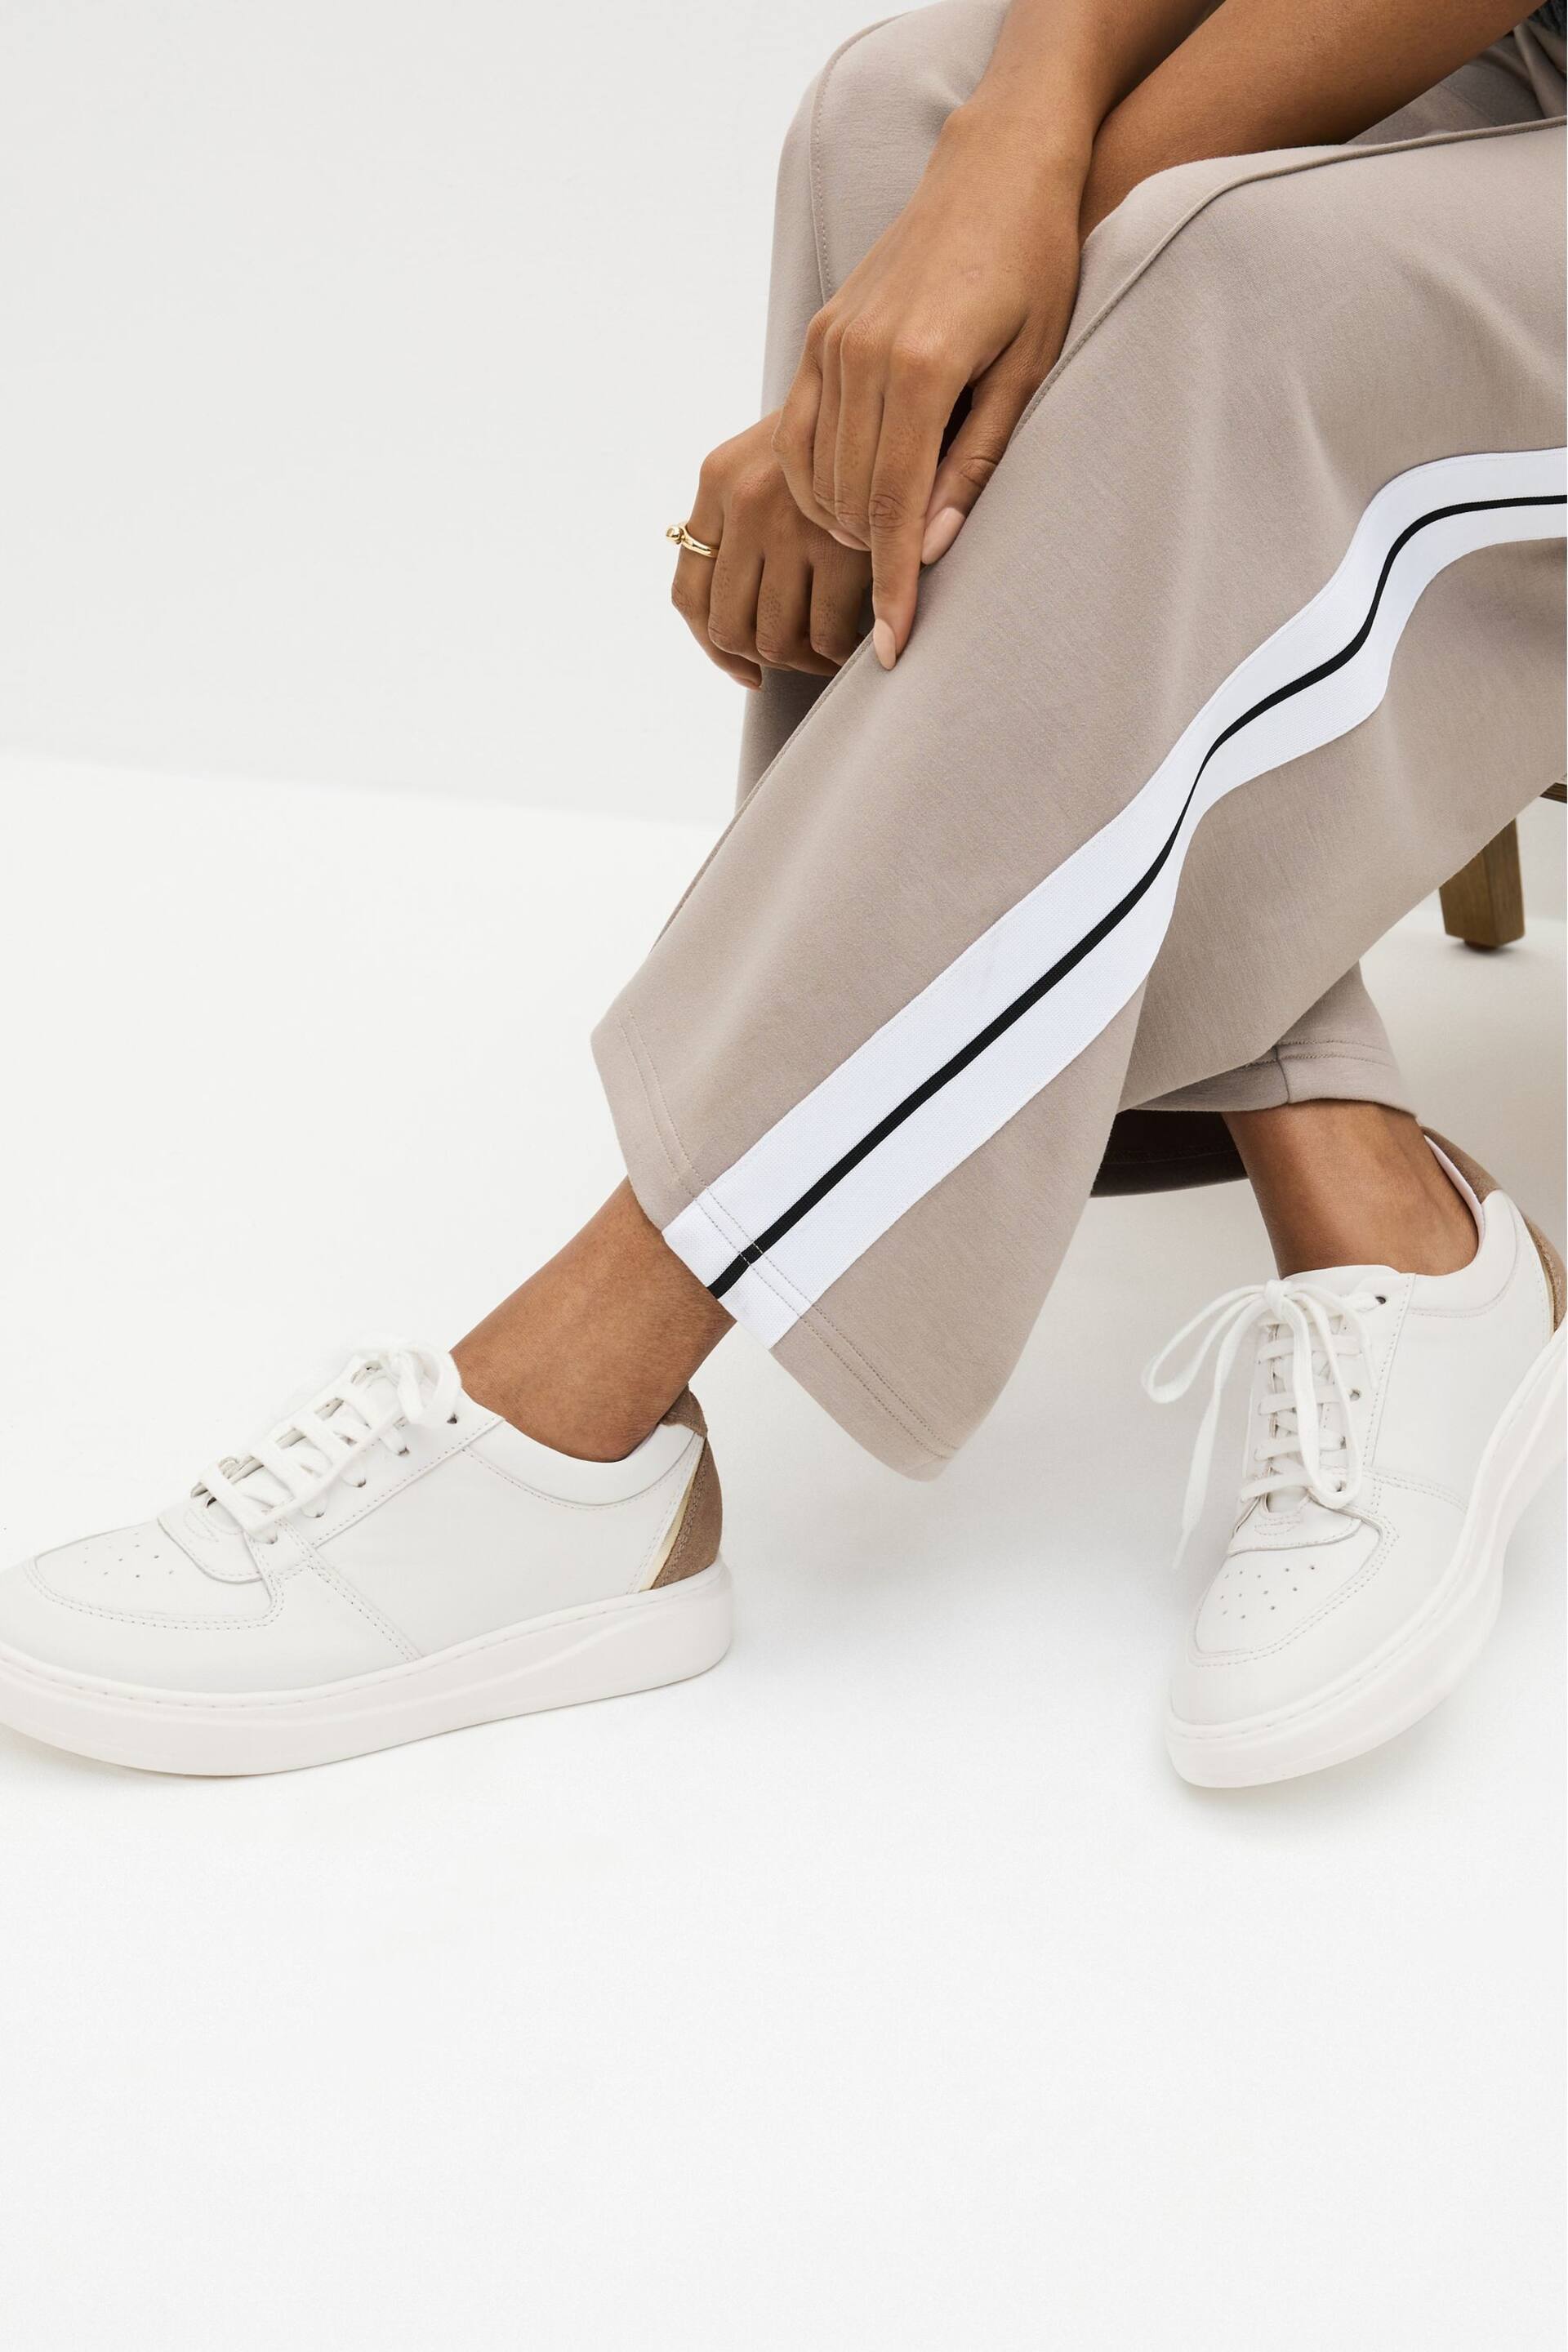 White Signature Leather Retro Lace Up Trainers - Image 1 of 8